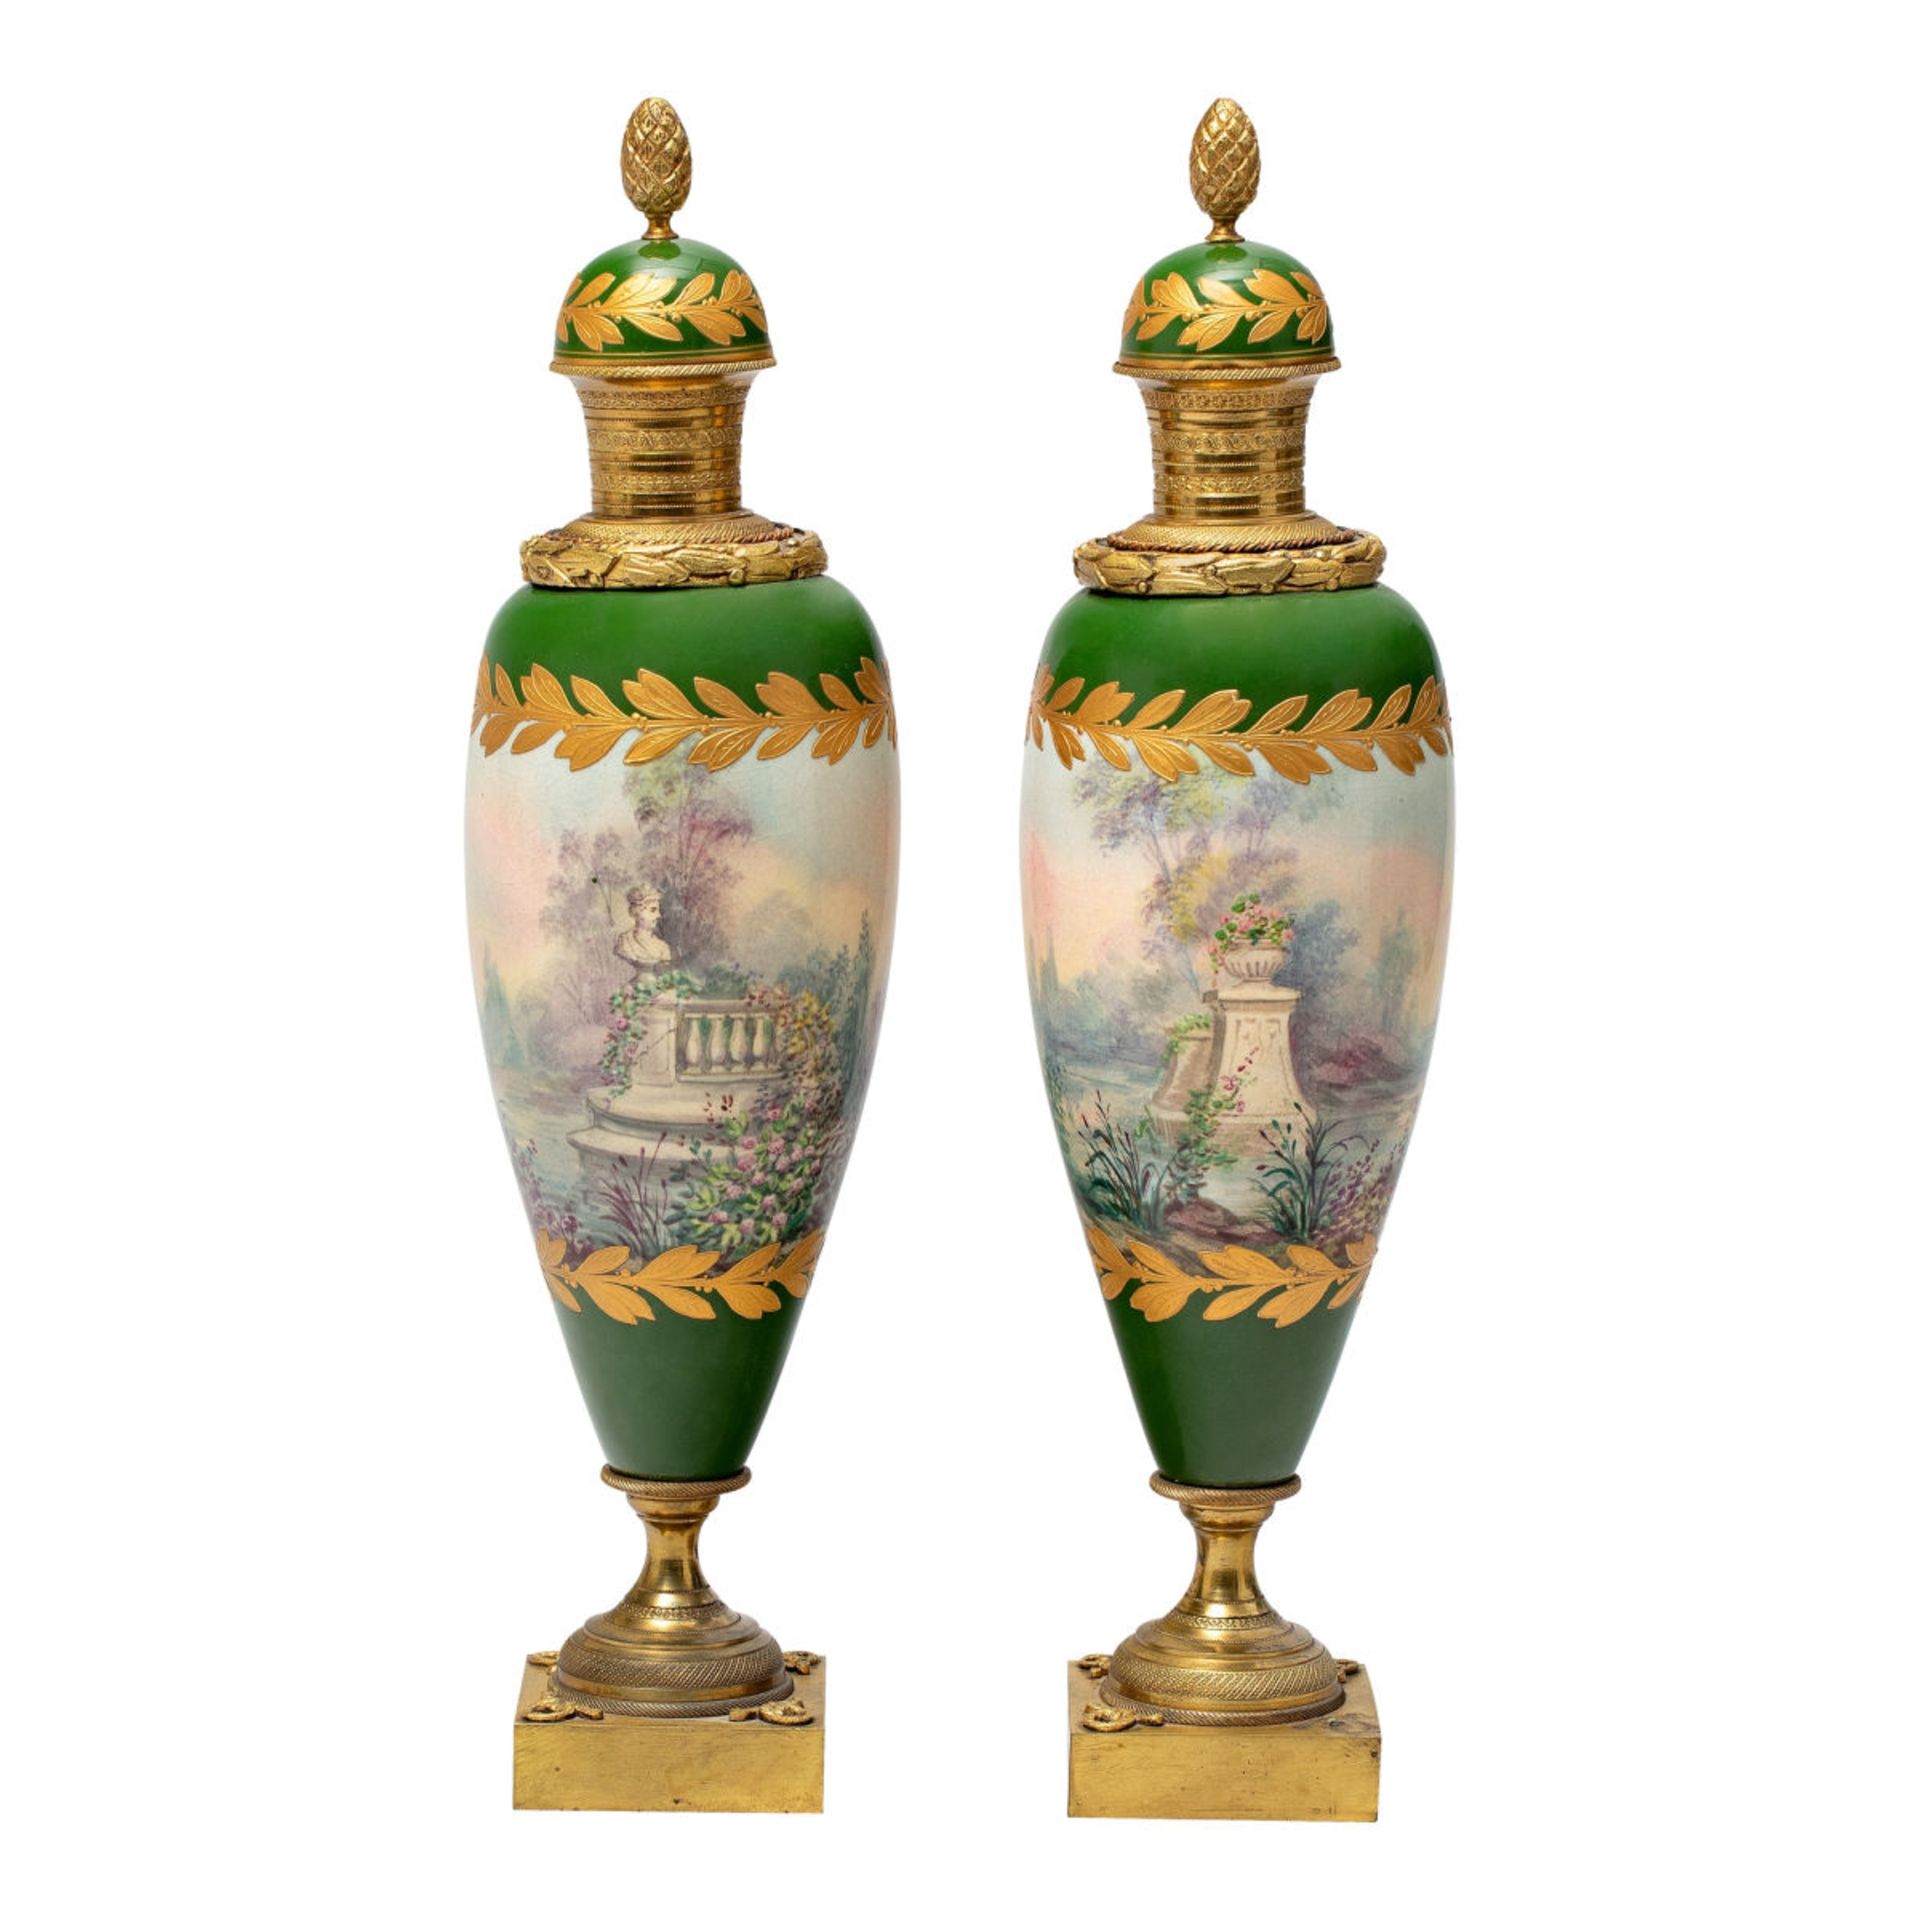 Pair of Sèvres showpiece vases with flâneurs - Image 2 of 8